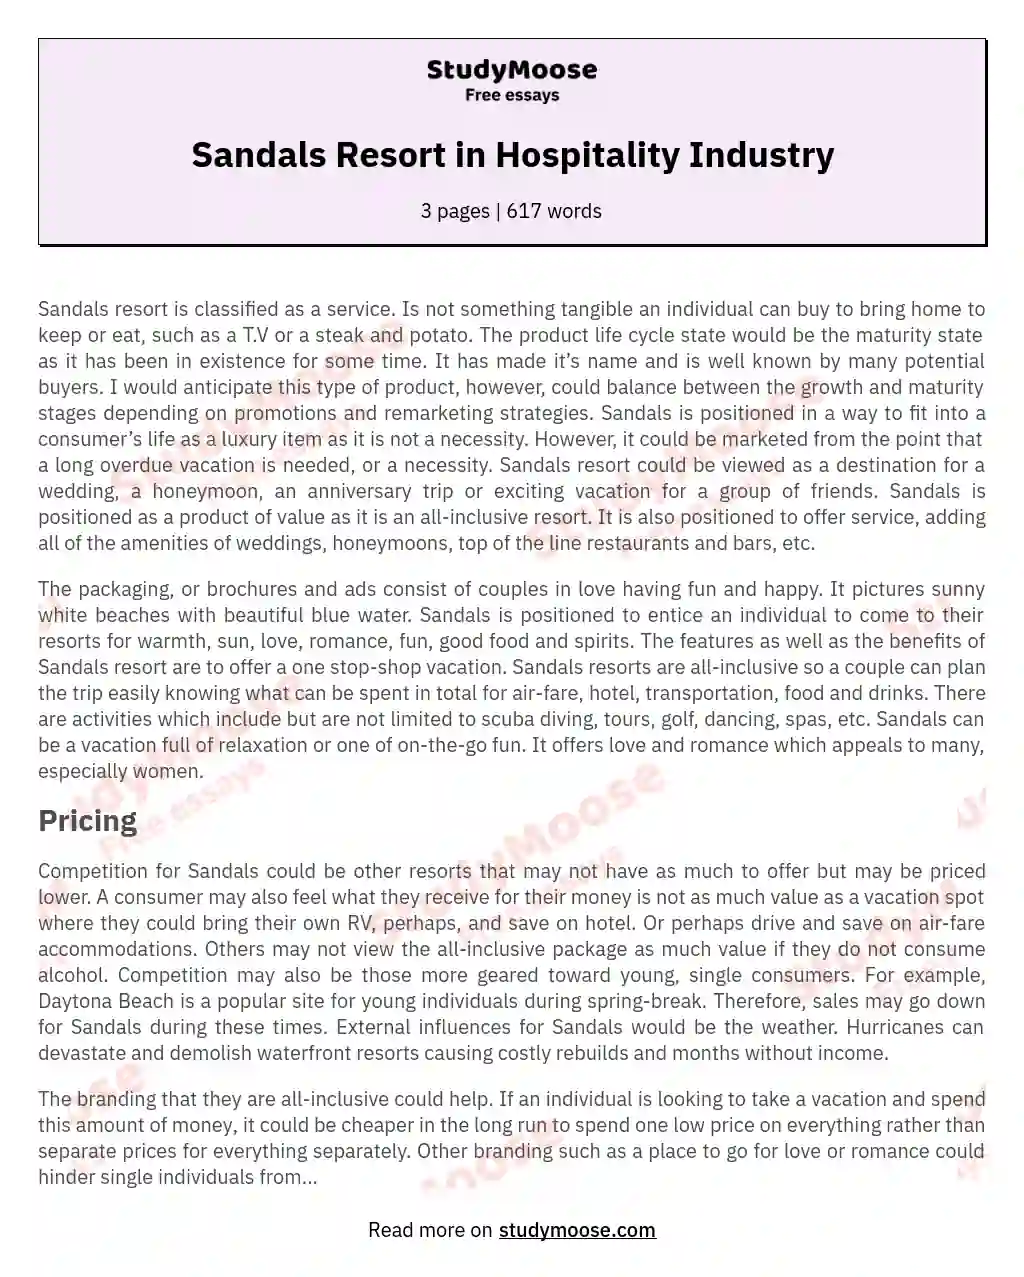 Sandals Resort in Hospitality Industry essay